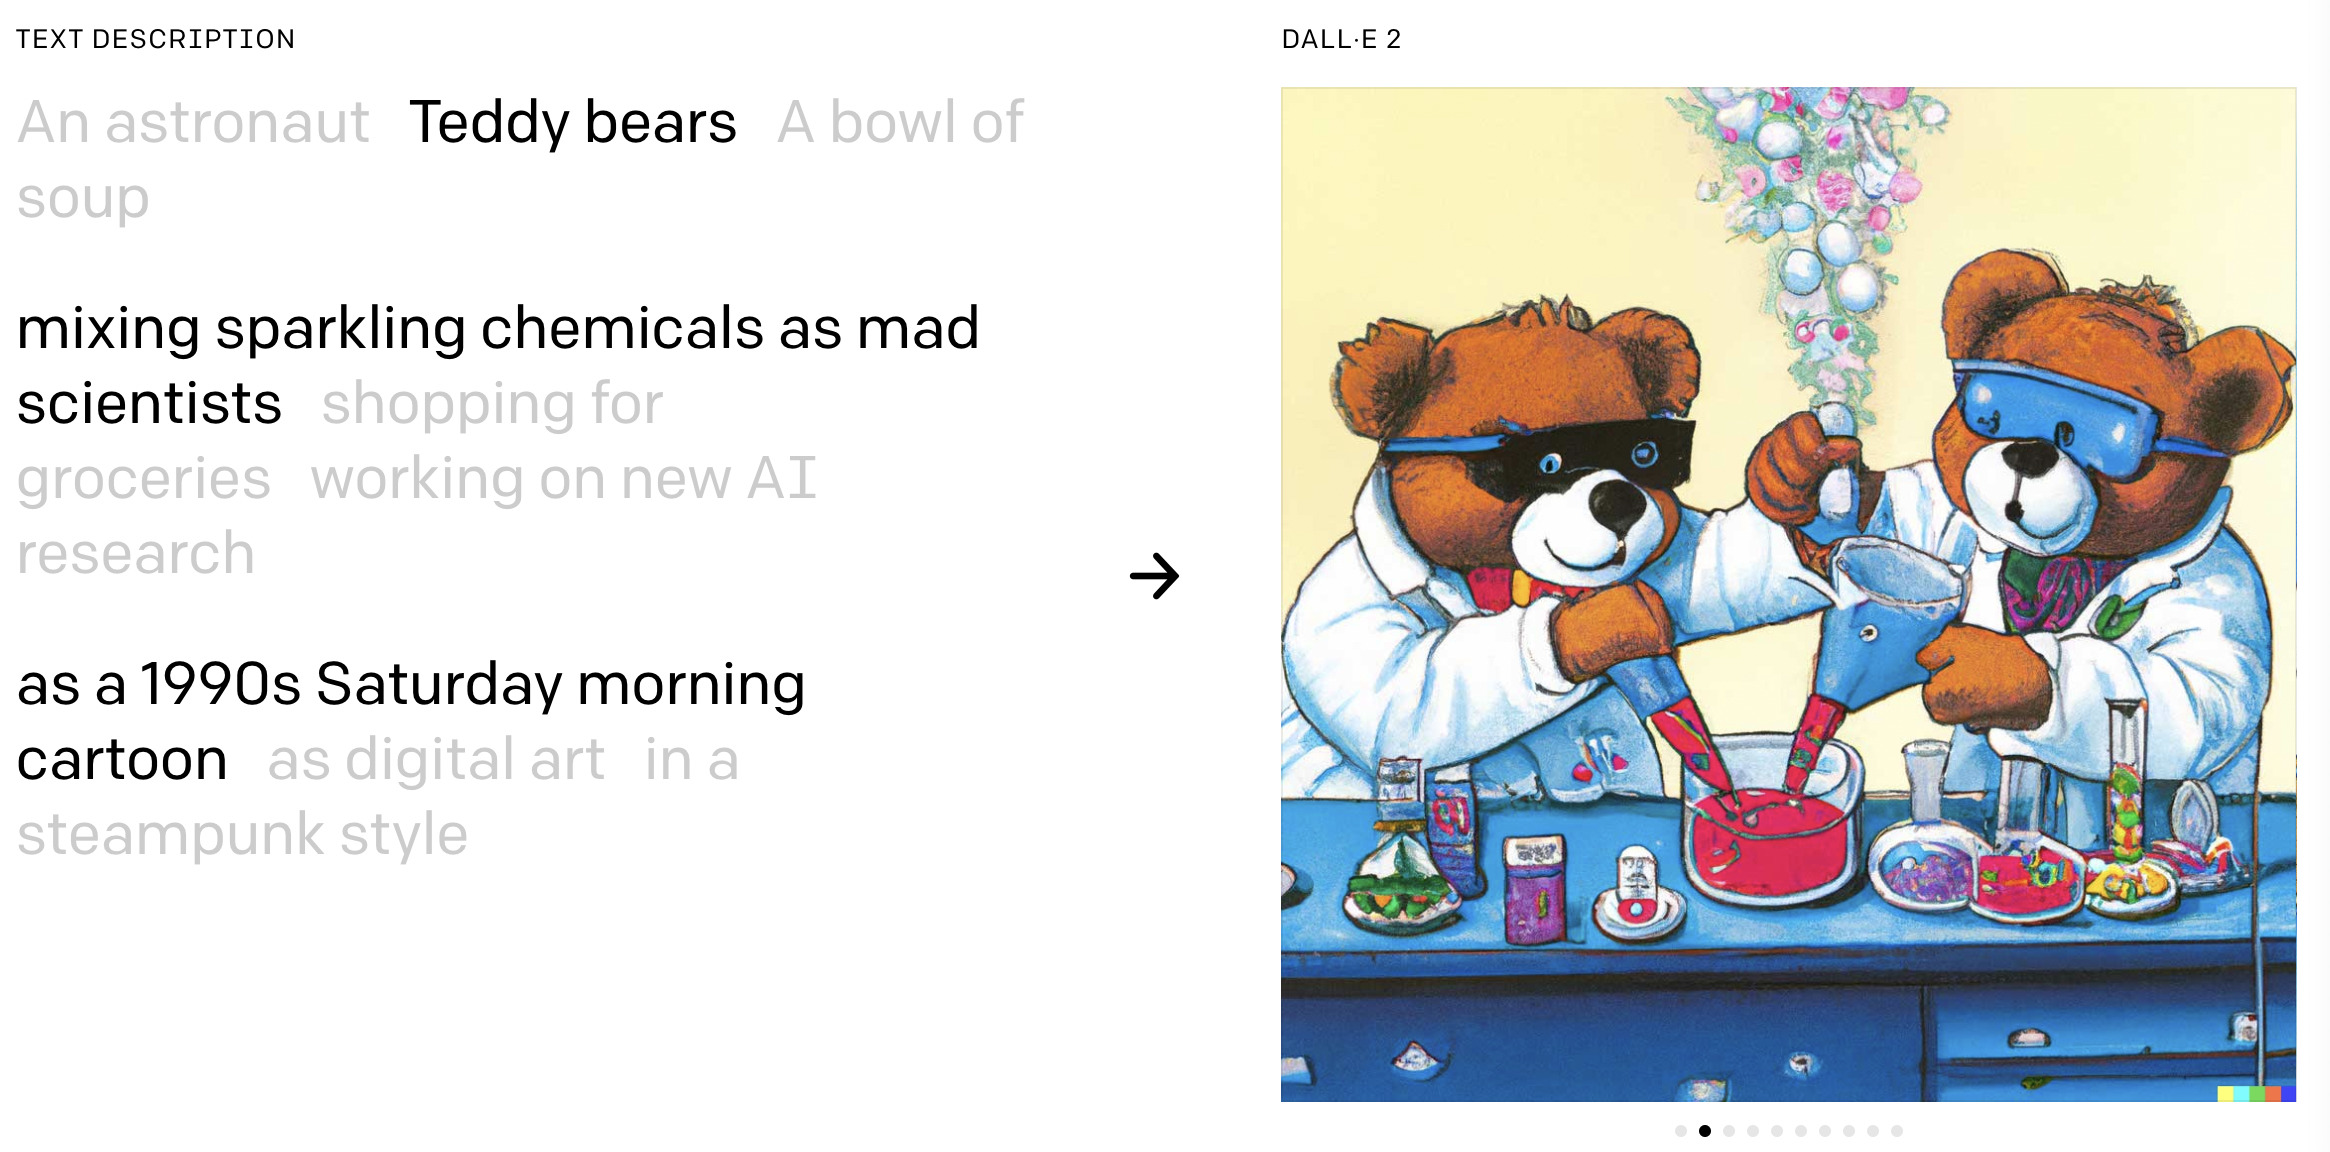 OpenAI's [DALL·E 2](https://openai.com/dall-e-2/)'s picture creation from a text description: "Teddy bears mixing sparkling chemicals as mad scientists as a 1990s Saturday morning cartoon" (see [https://openai.com/dall-e-2/](https://openai.com/dall-e-2/))